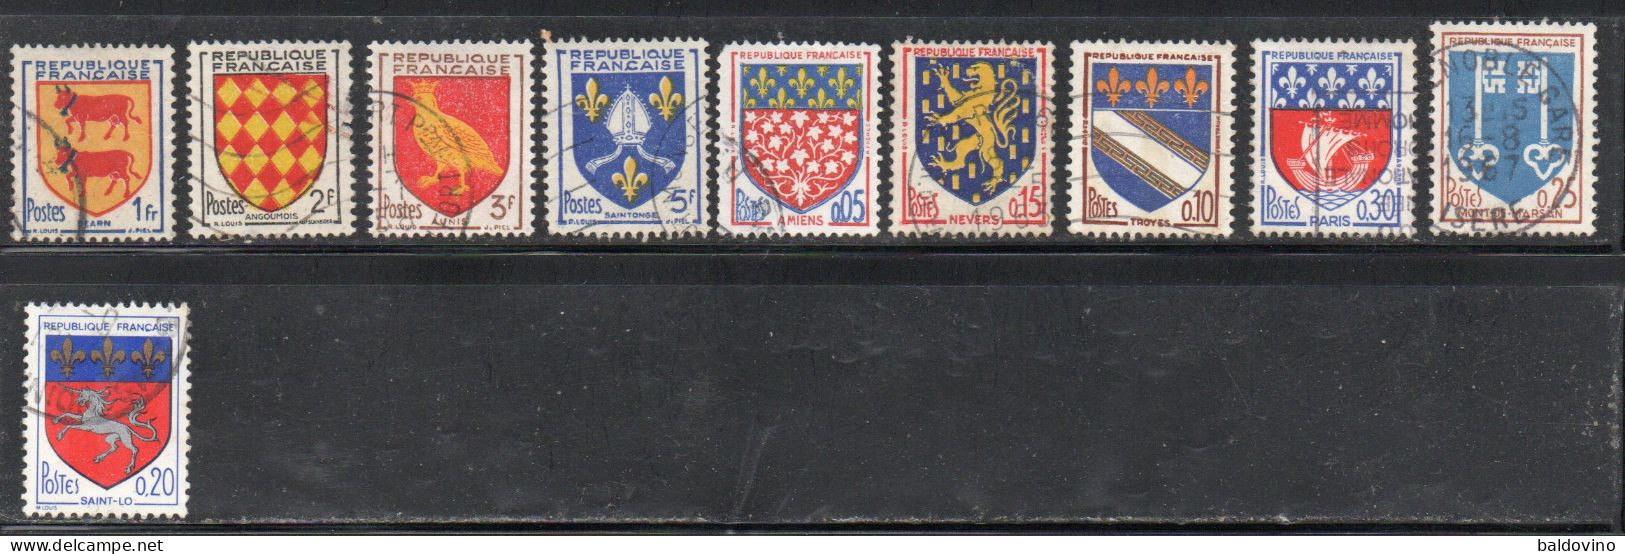 France 1951/1966 YT N° 901-1510 10 Pcs. - 1941-66 Coat Of Arms And Heraldry